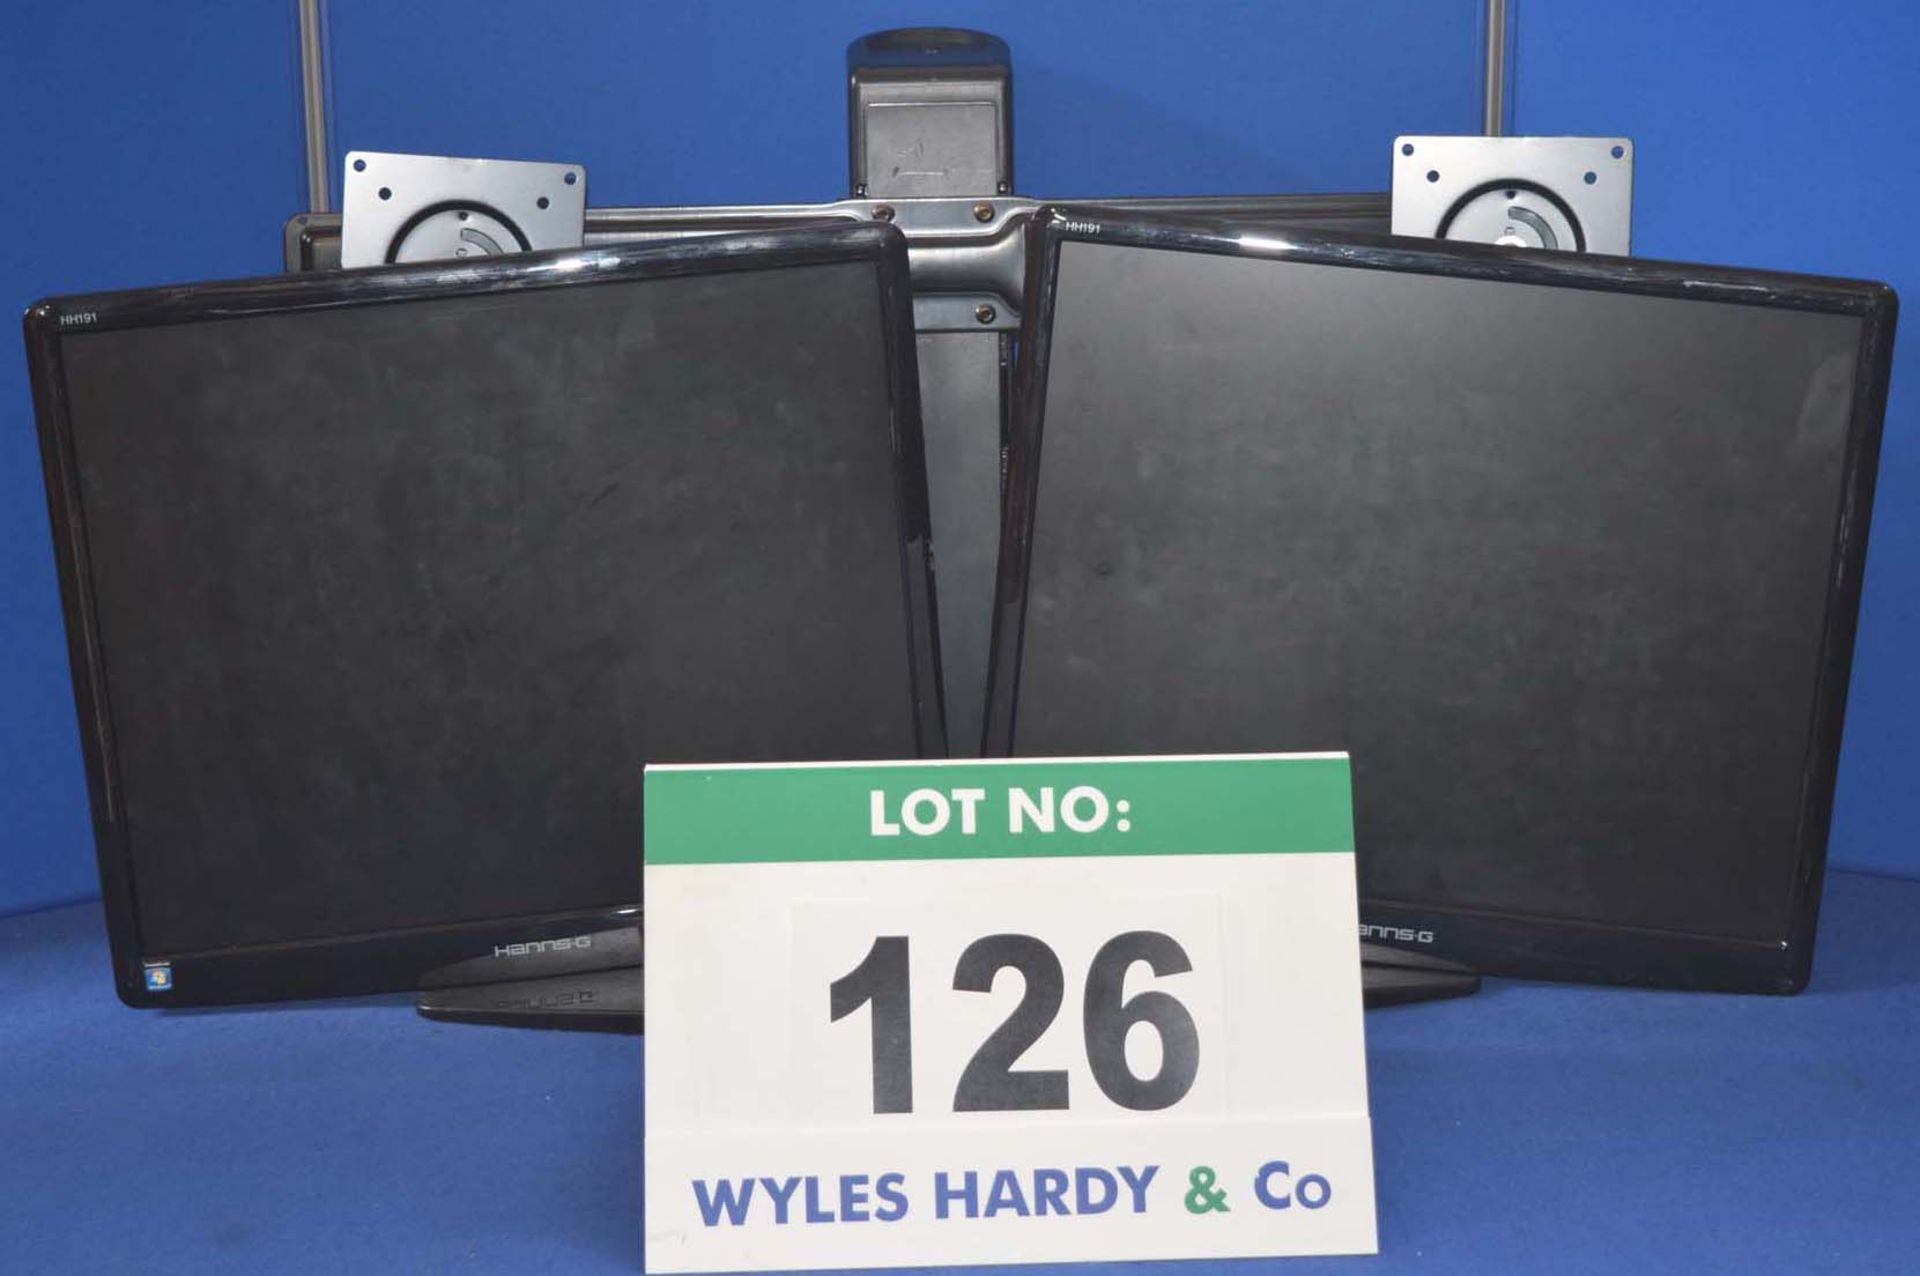 2: HANNS-G 19" Flat Panel Displays with an Adjustable Twin Monitor Stand (No Fixing Screws for